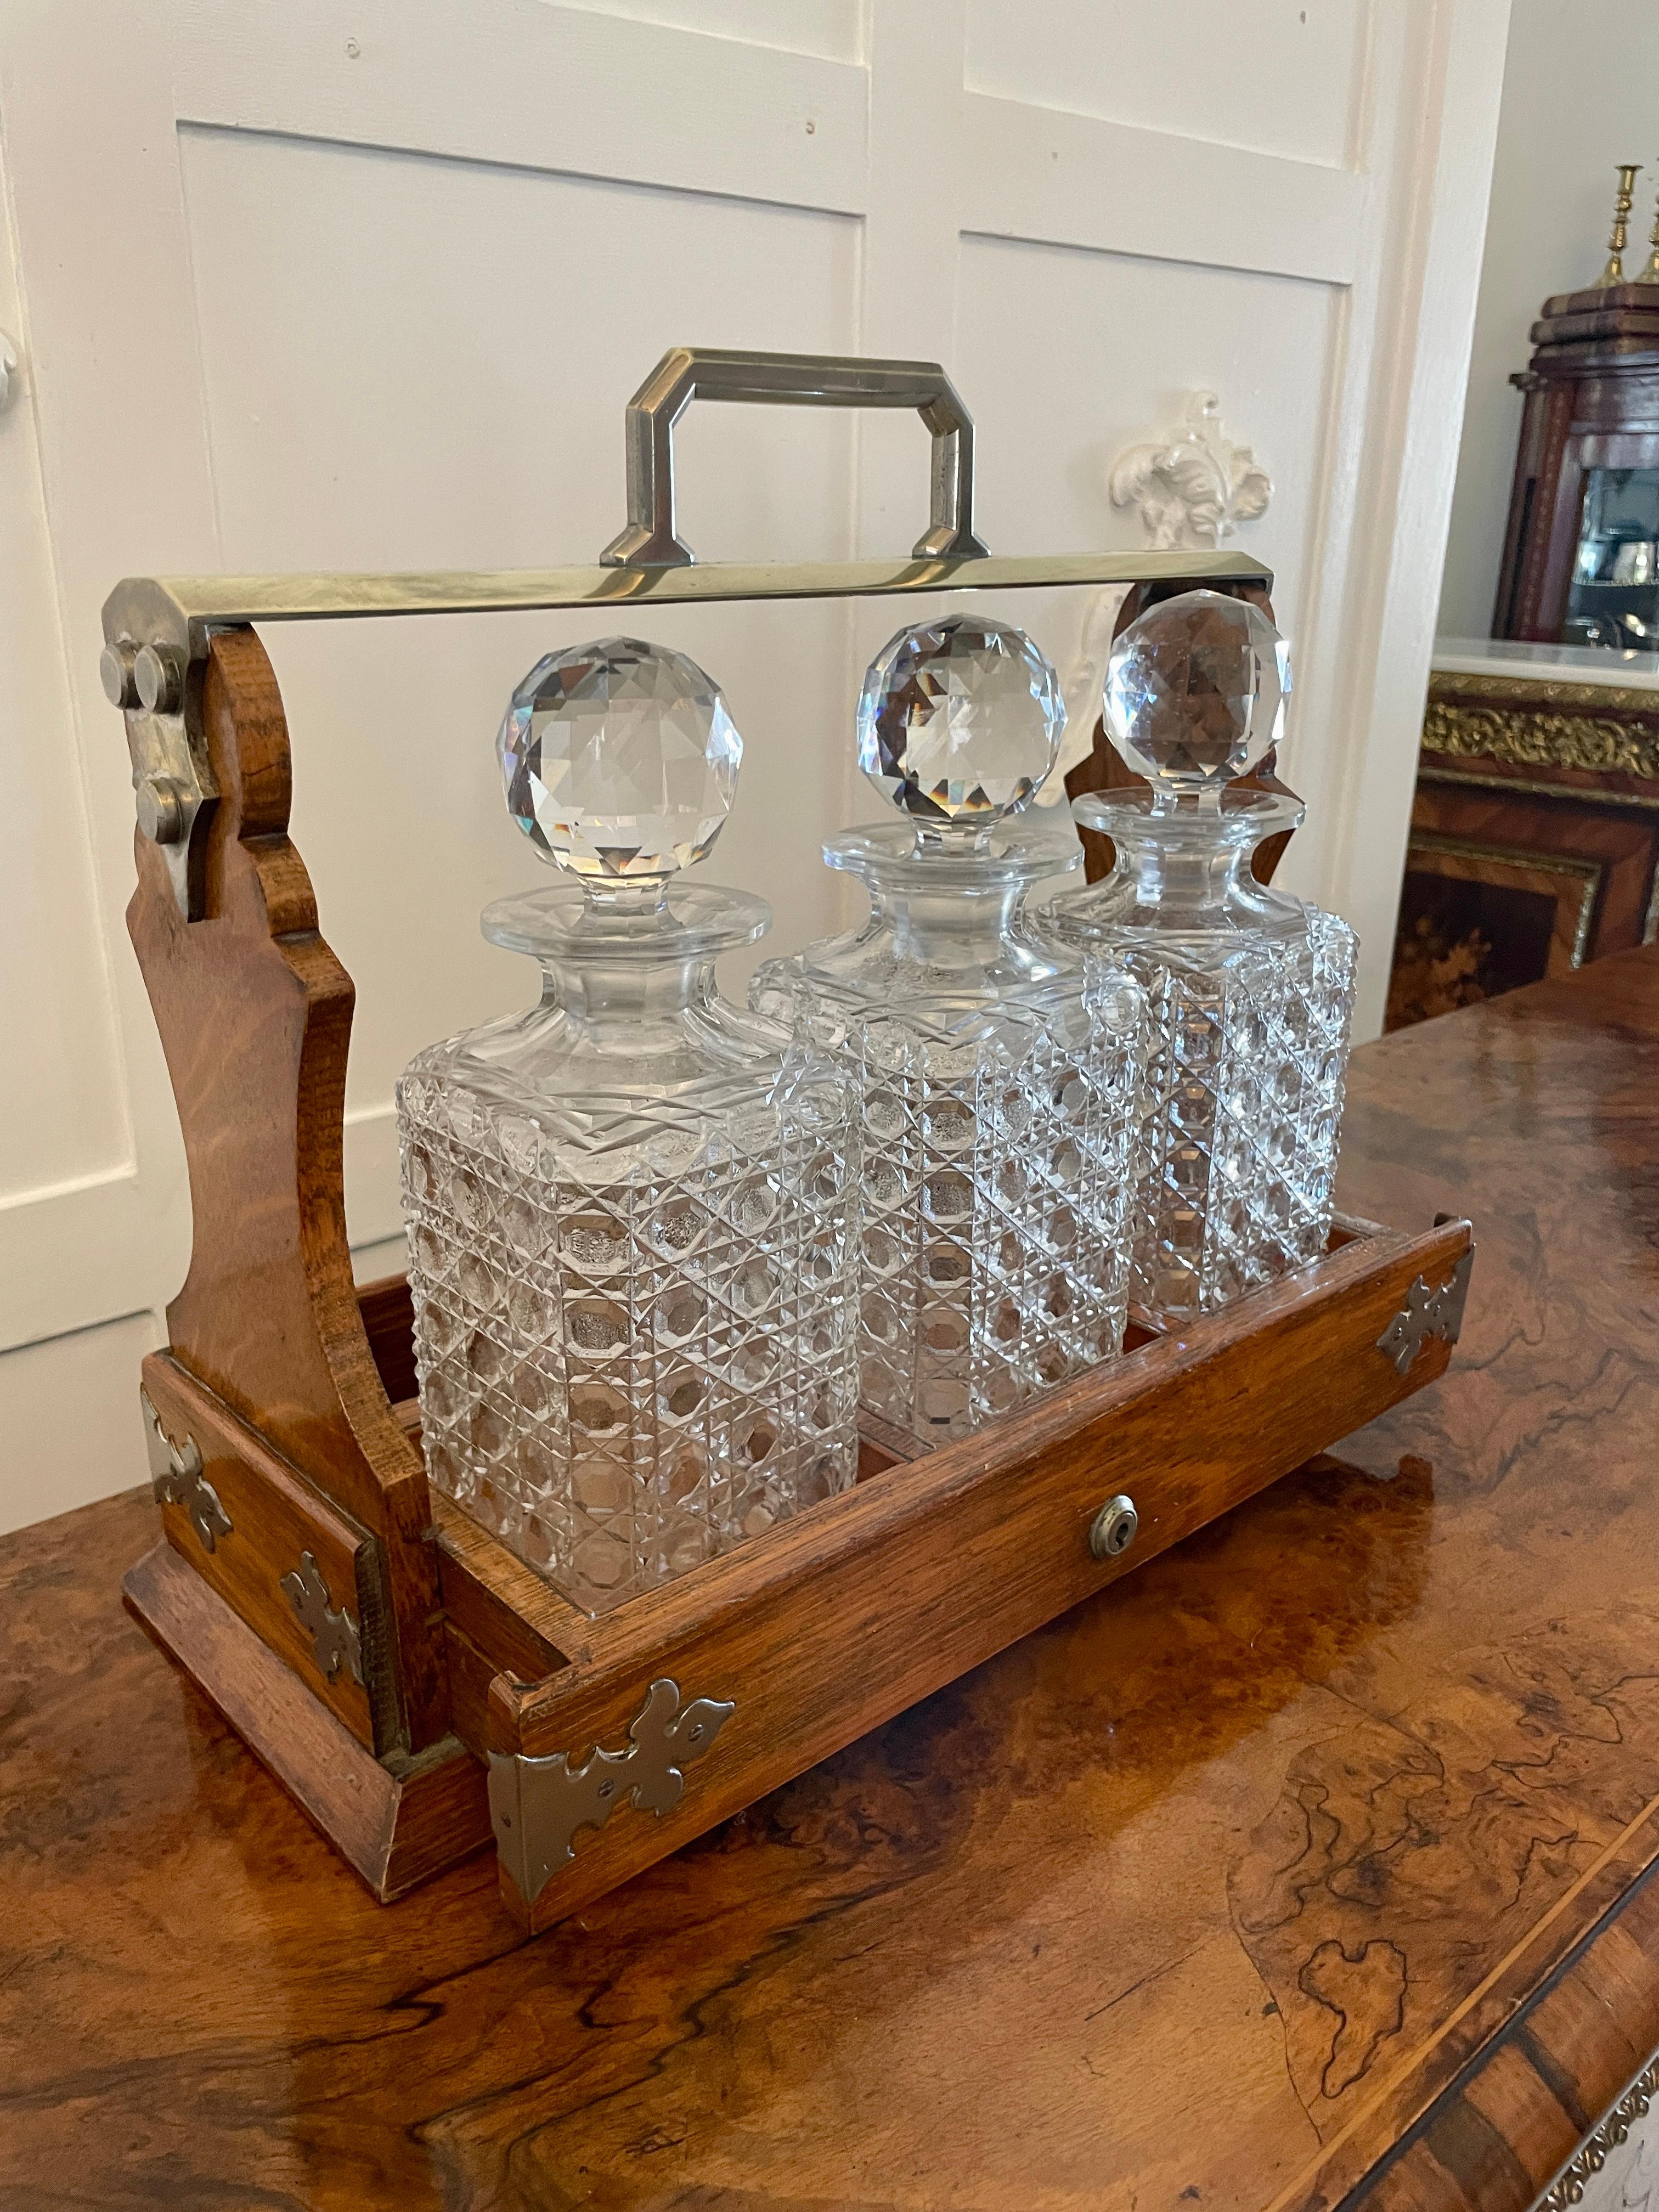 Antique Victorian quality oak tantalus by Mappin & Webb having a quality oak tantalus with a brass handle, unusual sliding base with three cut glass decanters and original stoppers 


A lovely example stamped with ‘The Cabinet’ 17 June